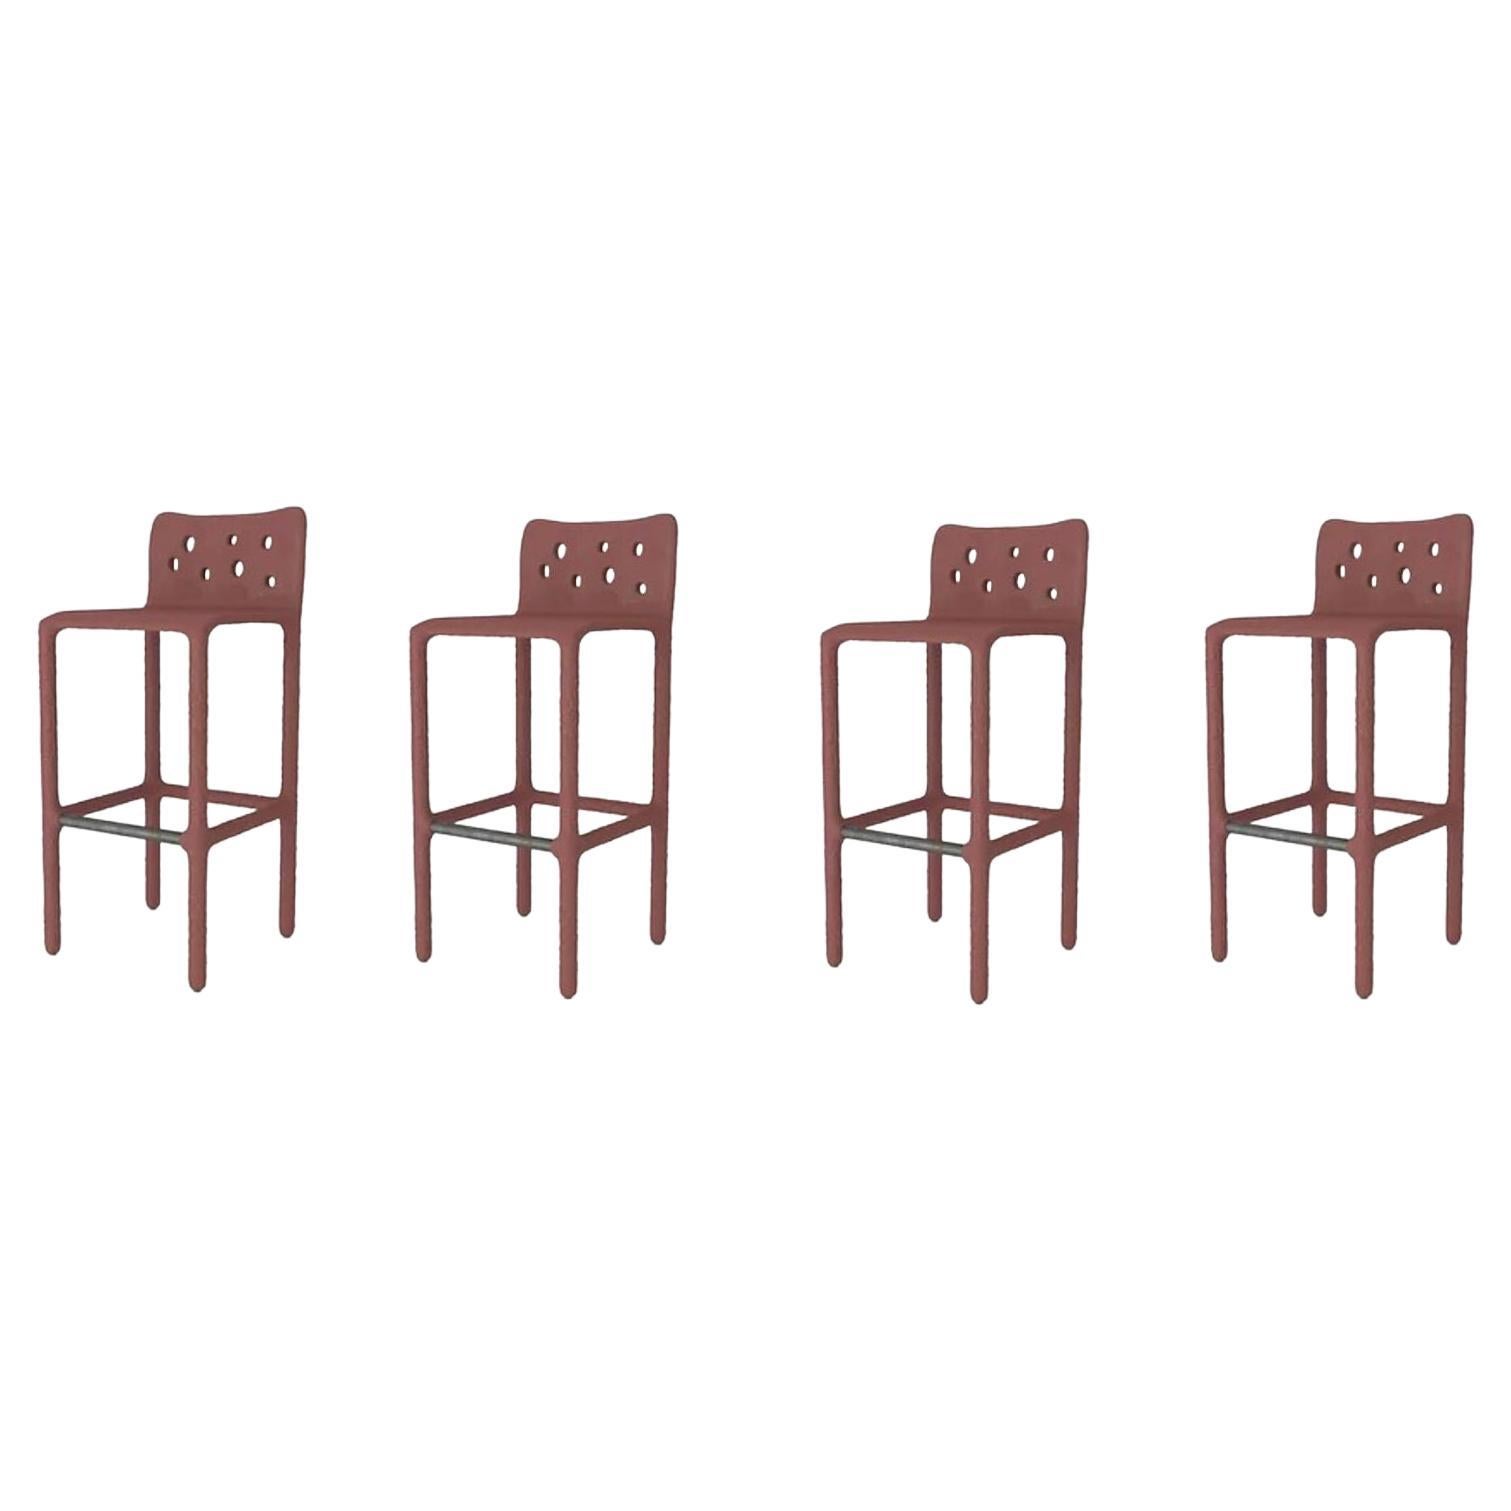 Set of 4 Outdoor Red Sculpted Contemporary Chairs by Faina